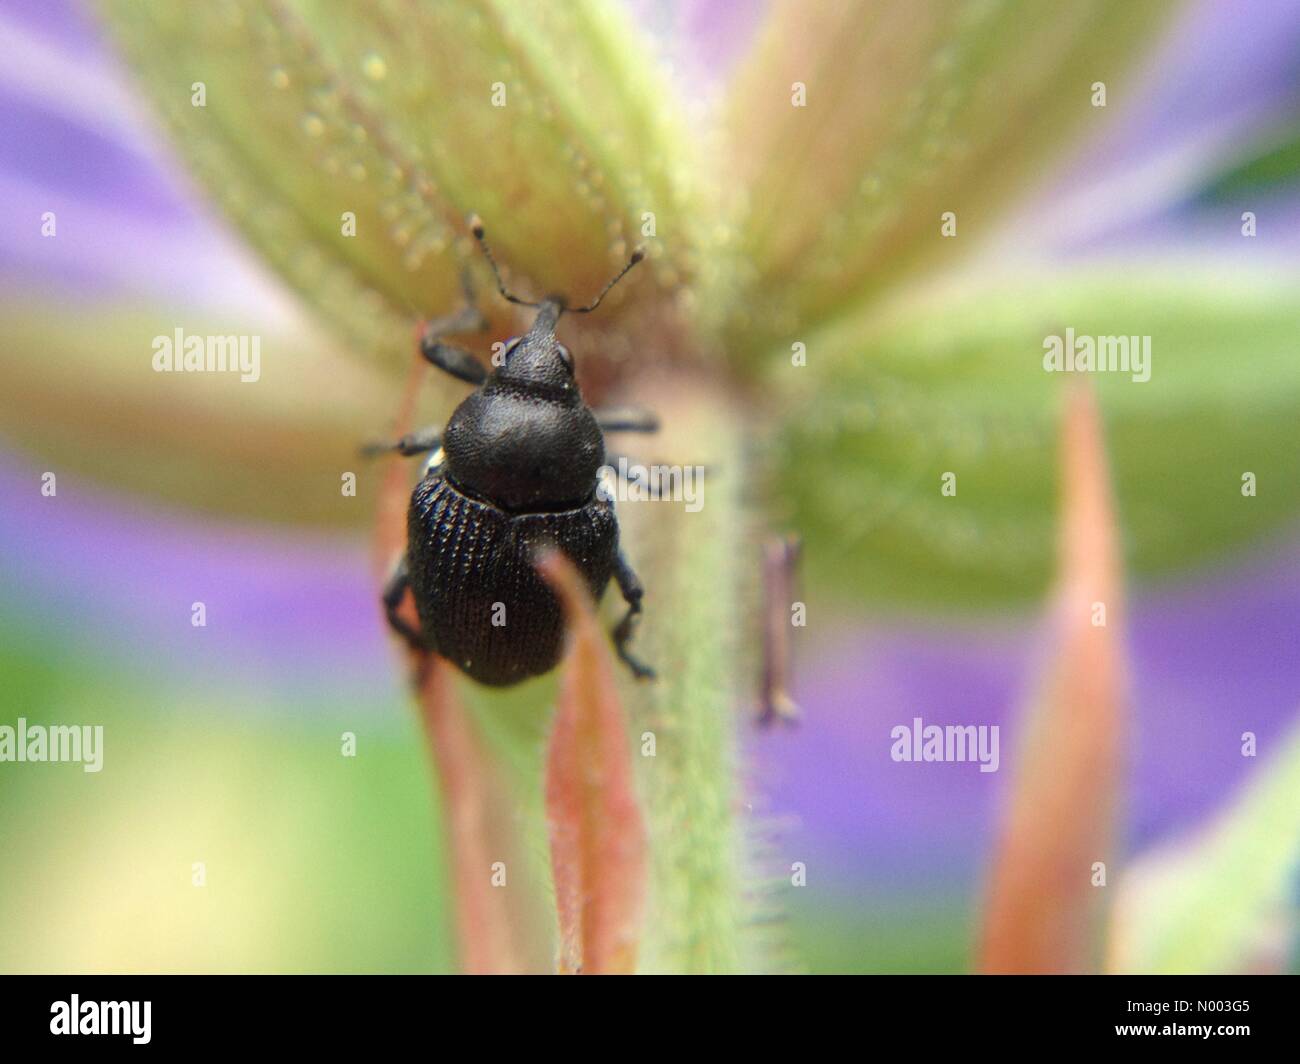 UK weather insects in West Yorkshire - as the warm weather continues the insects continue to enjoy the sun. This beetle was pollinating a hardy geranium. Taken on the 2nd July 2015 in West Yorkshire. Stock Photo